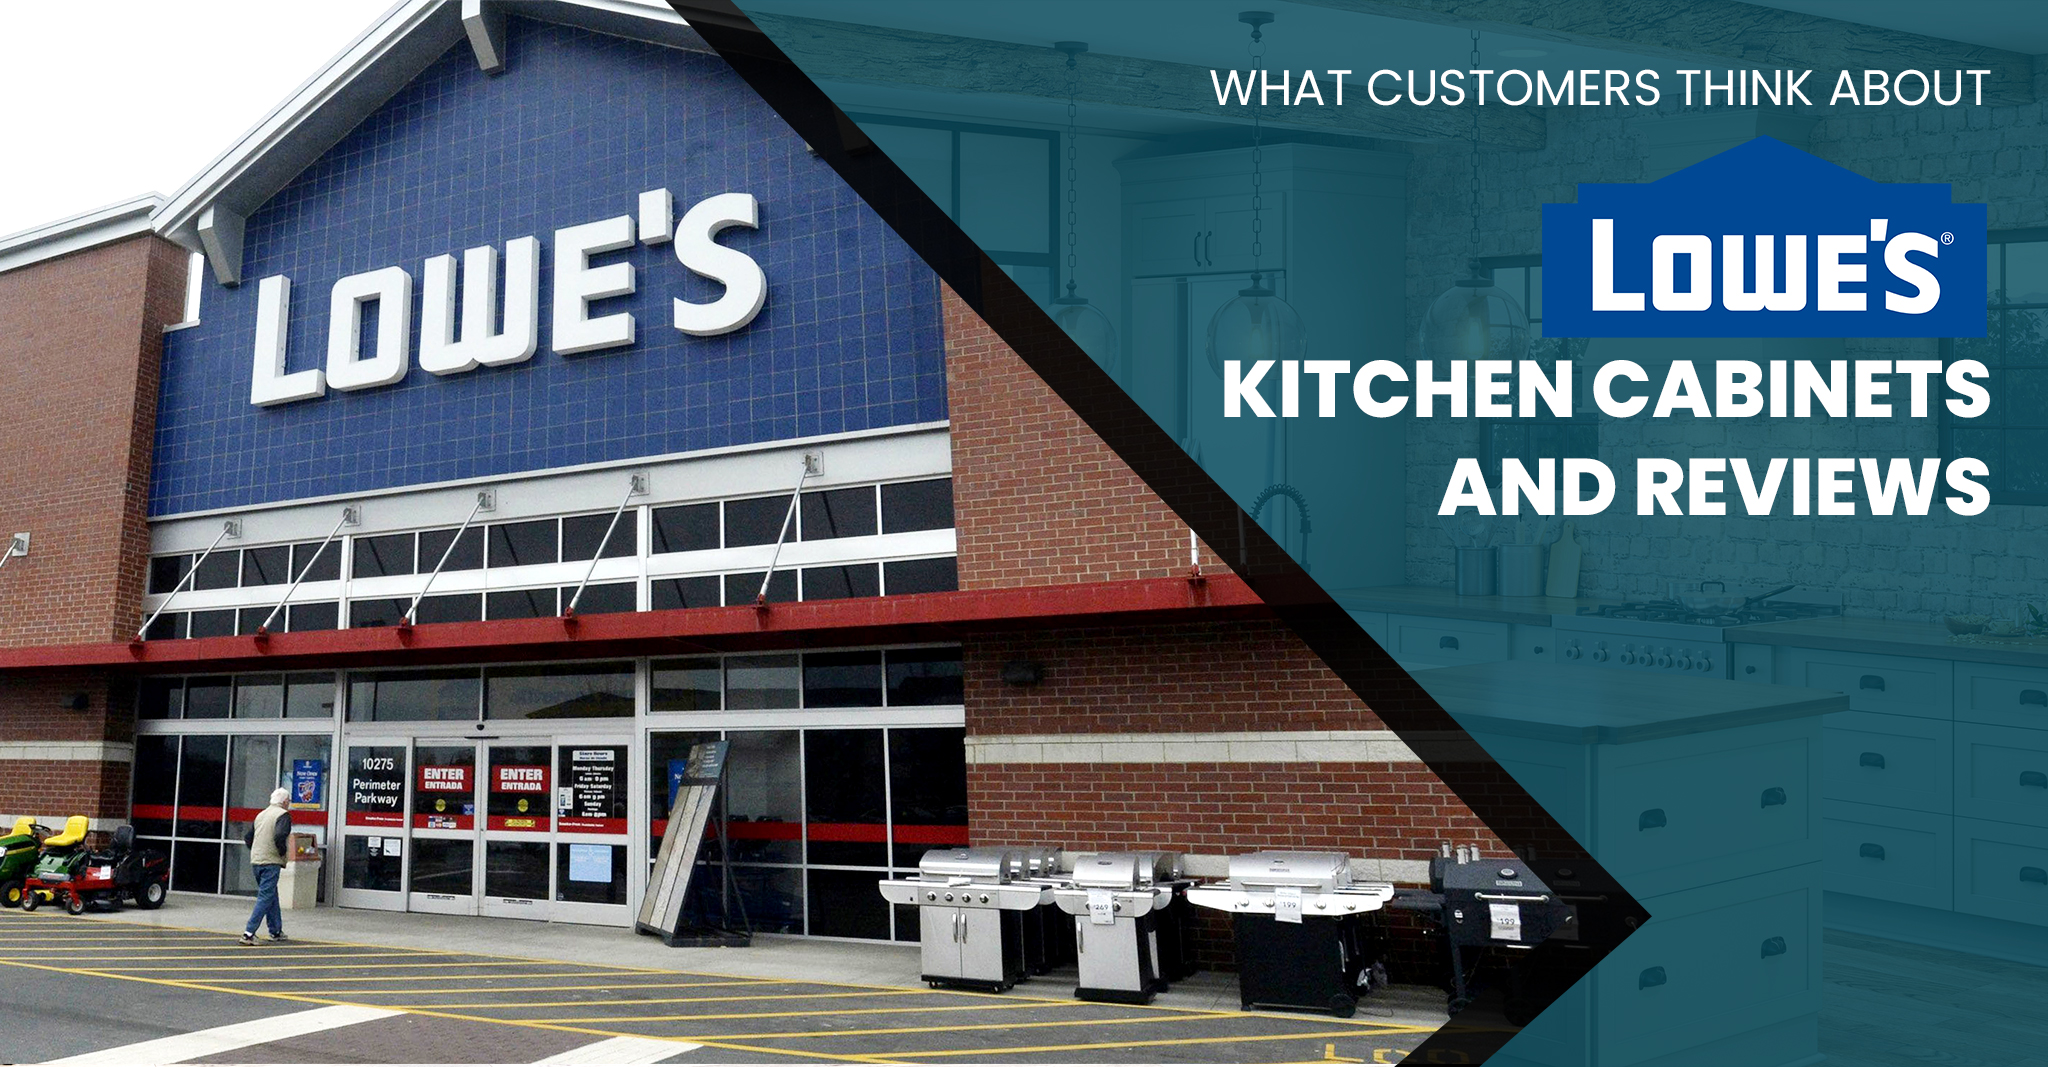 What Customers Think About Lowes Kitchen Cabinets + Reviews